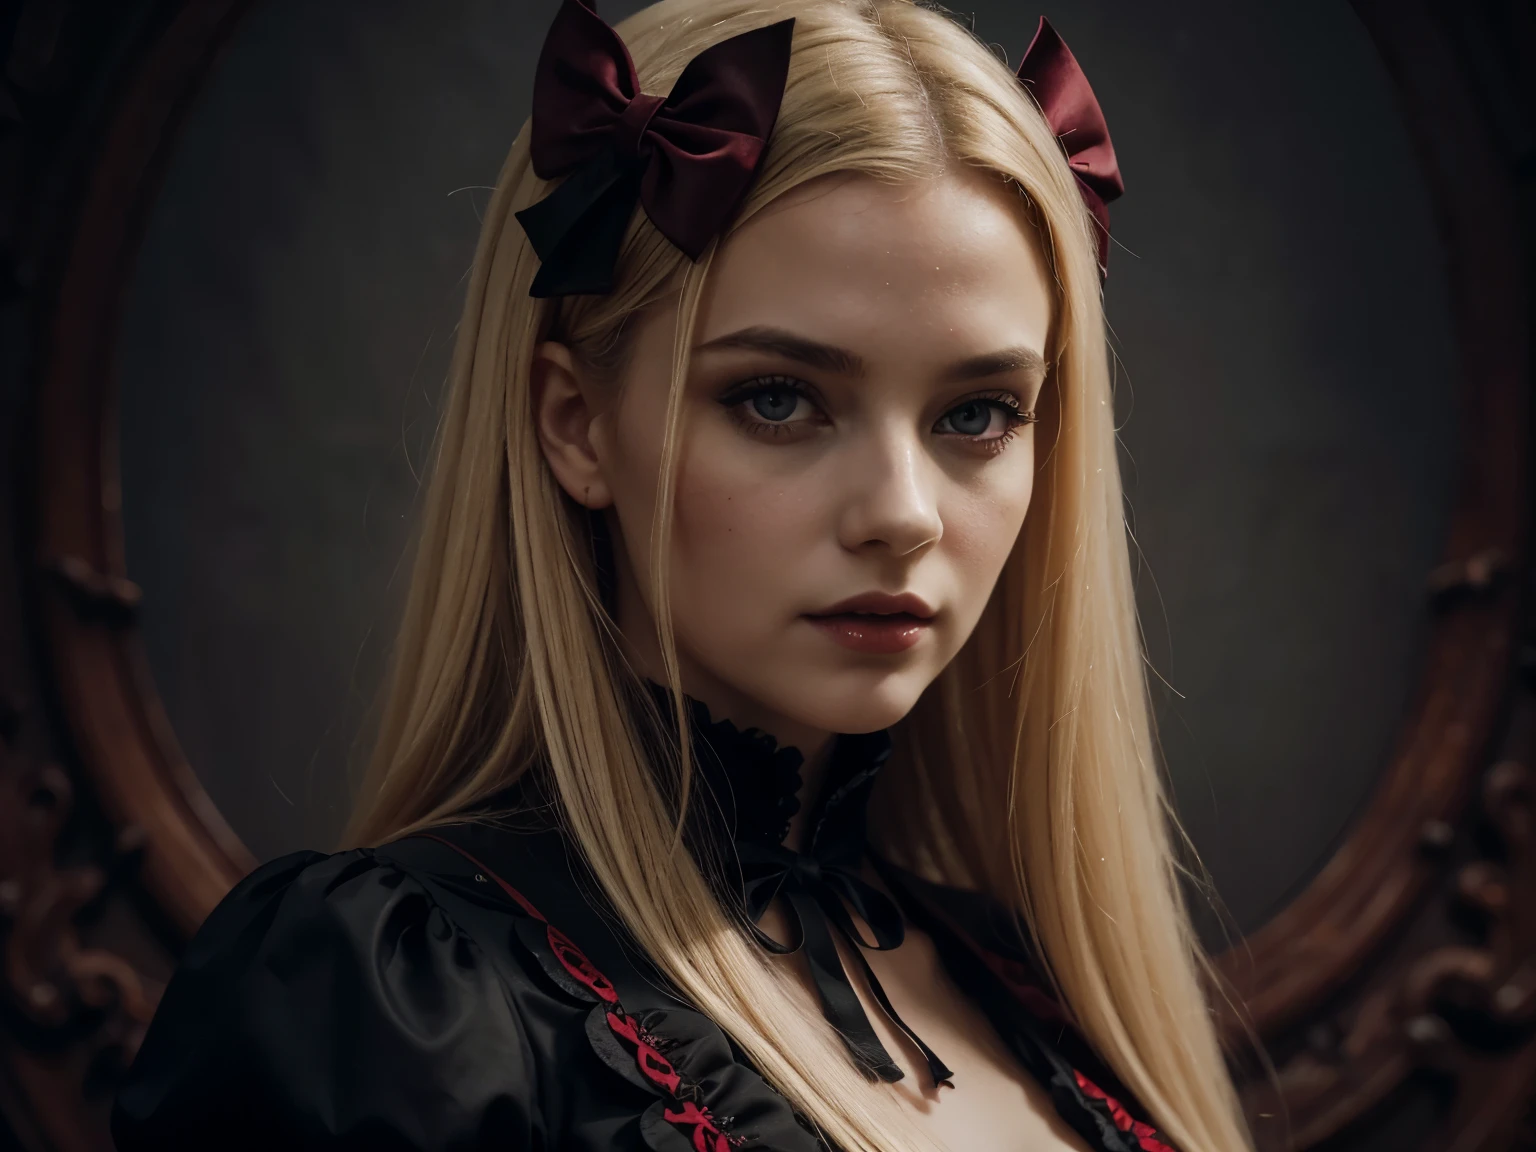 blond girl with red bow in black dress and red velvet dress, beautiful fantasy portrait, gothic princess portrait, romanticism portrait, karol bak uhd, beautiful fantasy art portrait, fantasy portrait, elegant victorian vampire, beautiful portrait photo, portrait shot, very beautiful portrait, beautiful portrait, portrait of magical young girl, an elegant gothic princess, fantasy art portrait, centered mid shot, eerie gothic place background with red color tones